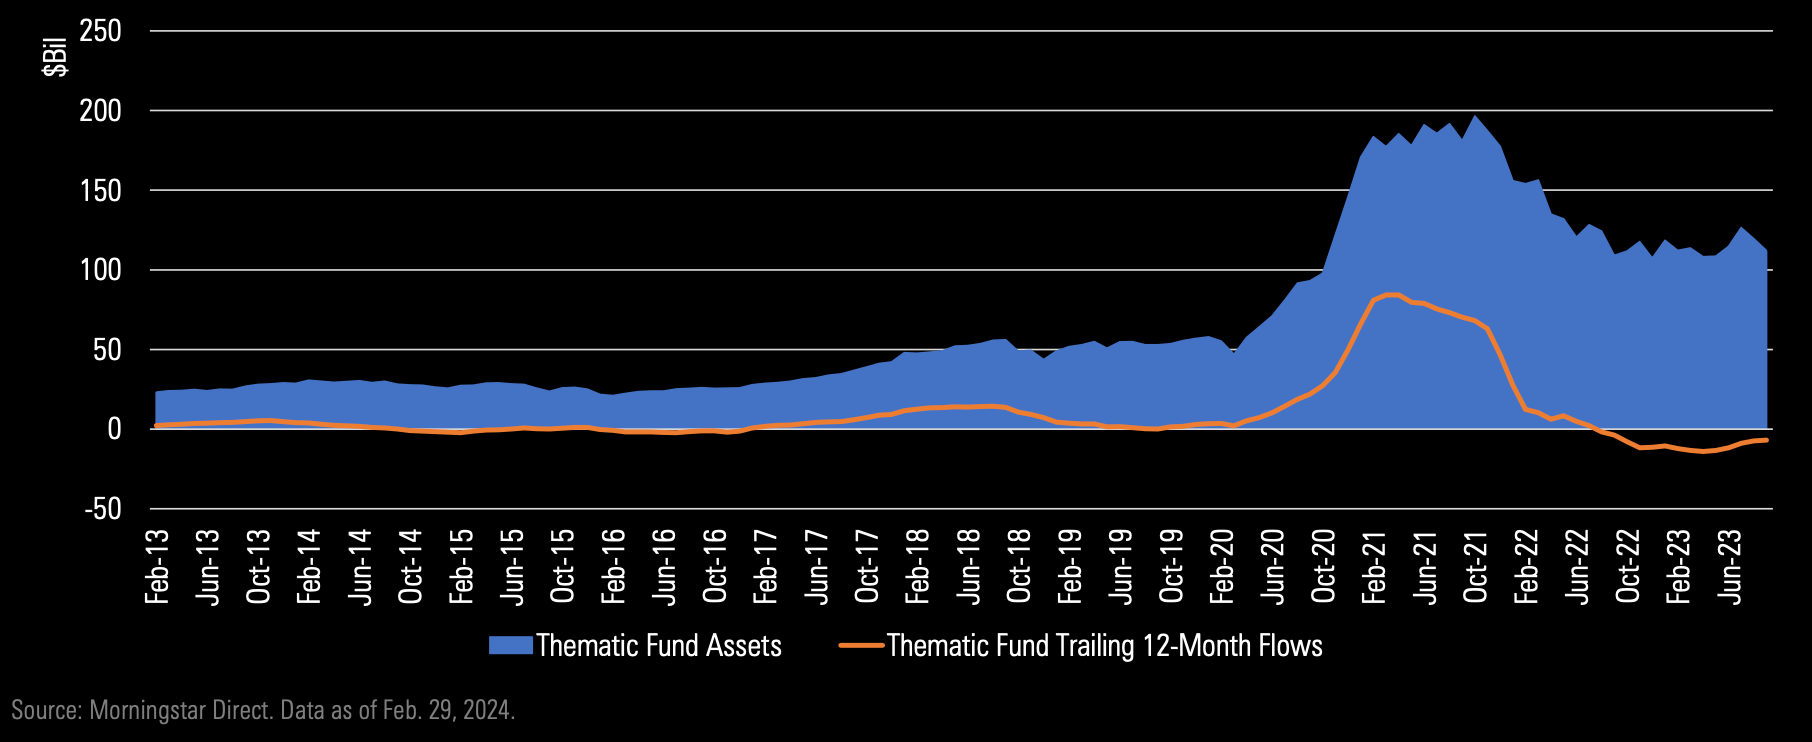 Line graph showing thematic fund assets and thematic fund trailing 12-month flows from February 2013 to June 2023.